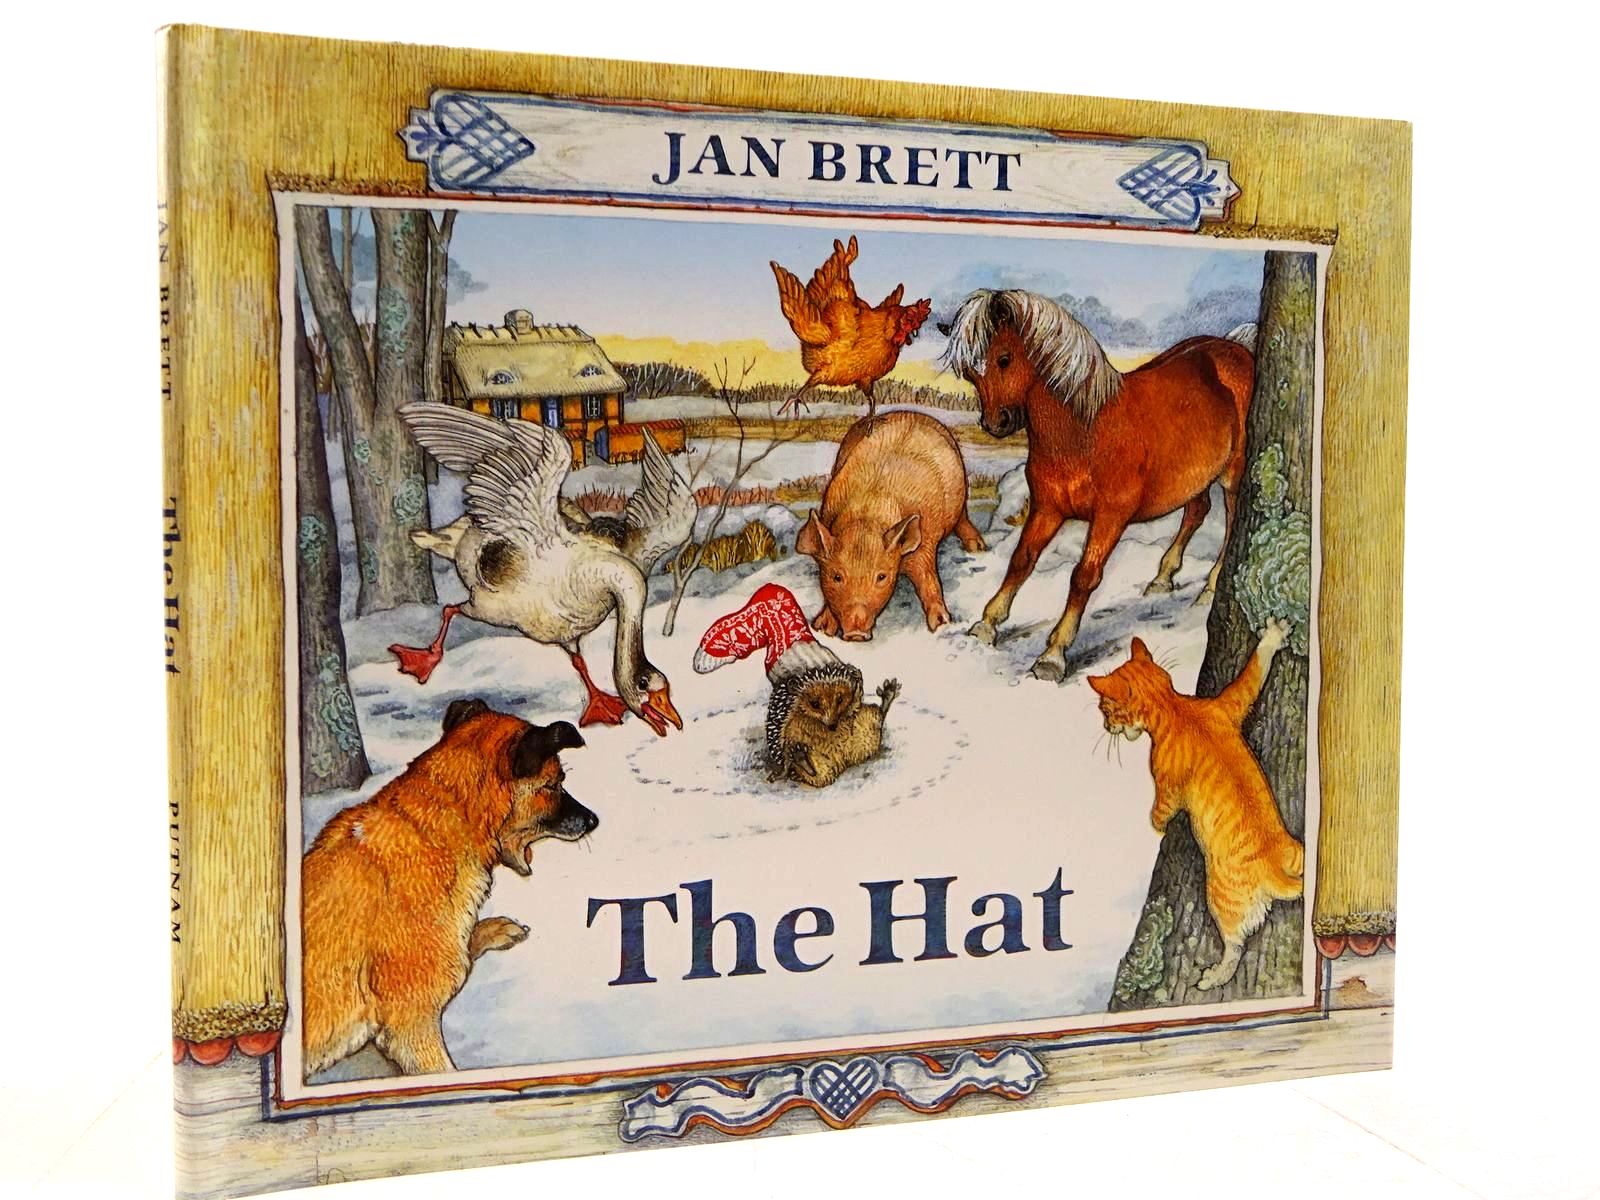 Photo of THE HAT written by Brett, Jan illustrated by Brett, Jan published by G.P. Putnam's Sons (STOCK CODE: 2130797)  for sale by Stella & Rose's Books